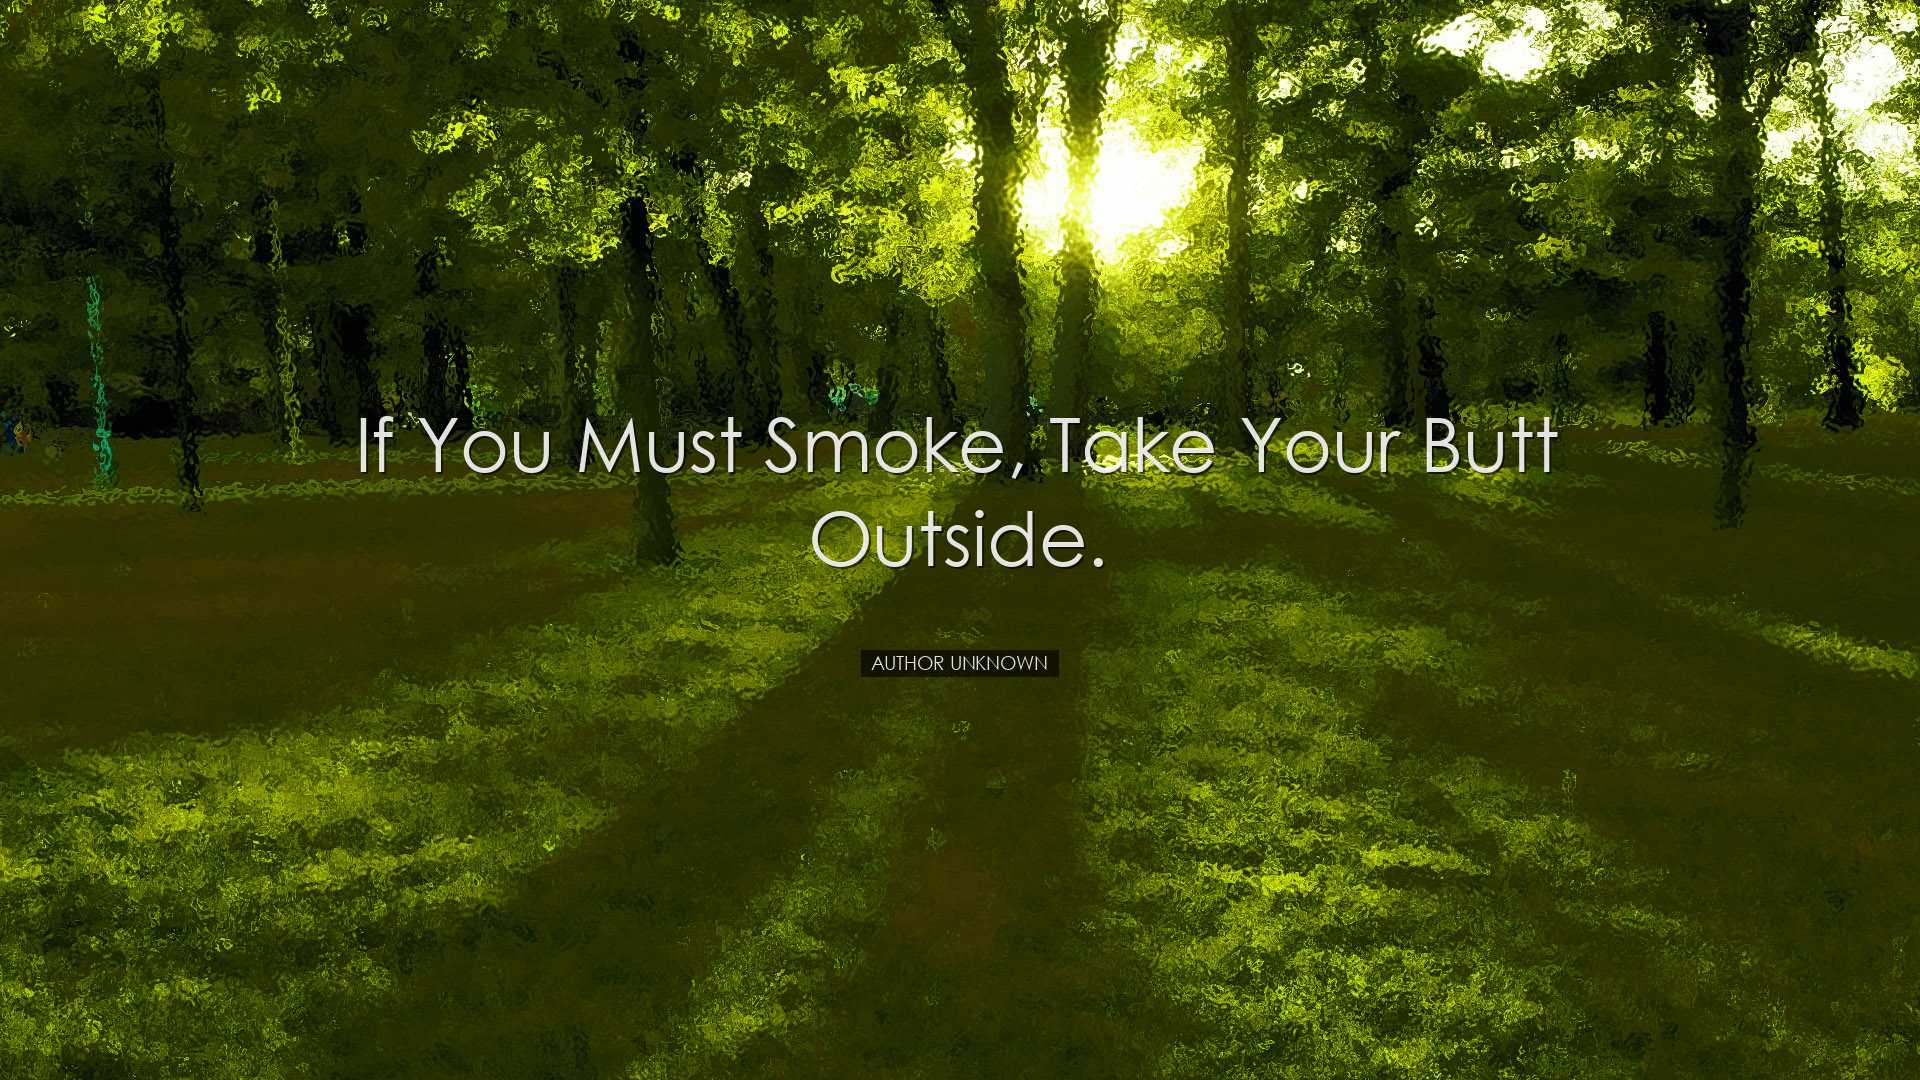 If you must smoke, take your butt outside. - Author Unknown